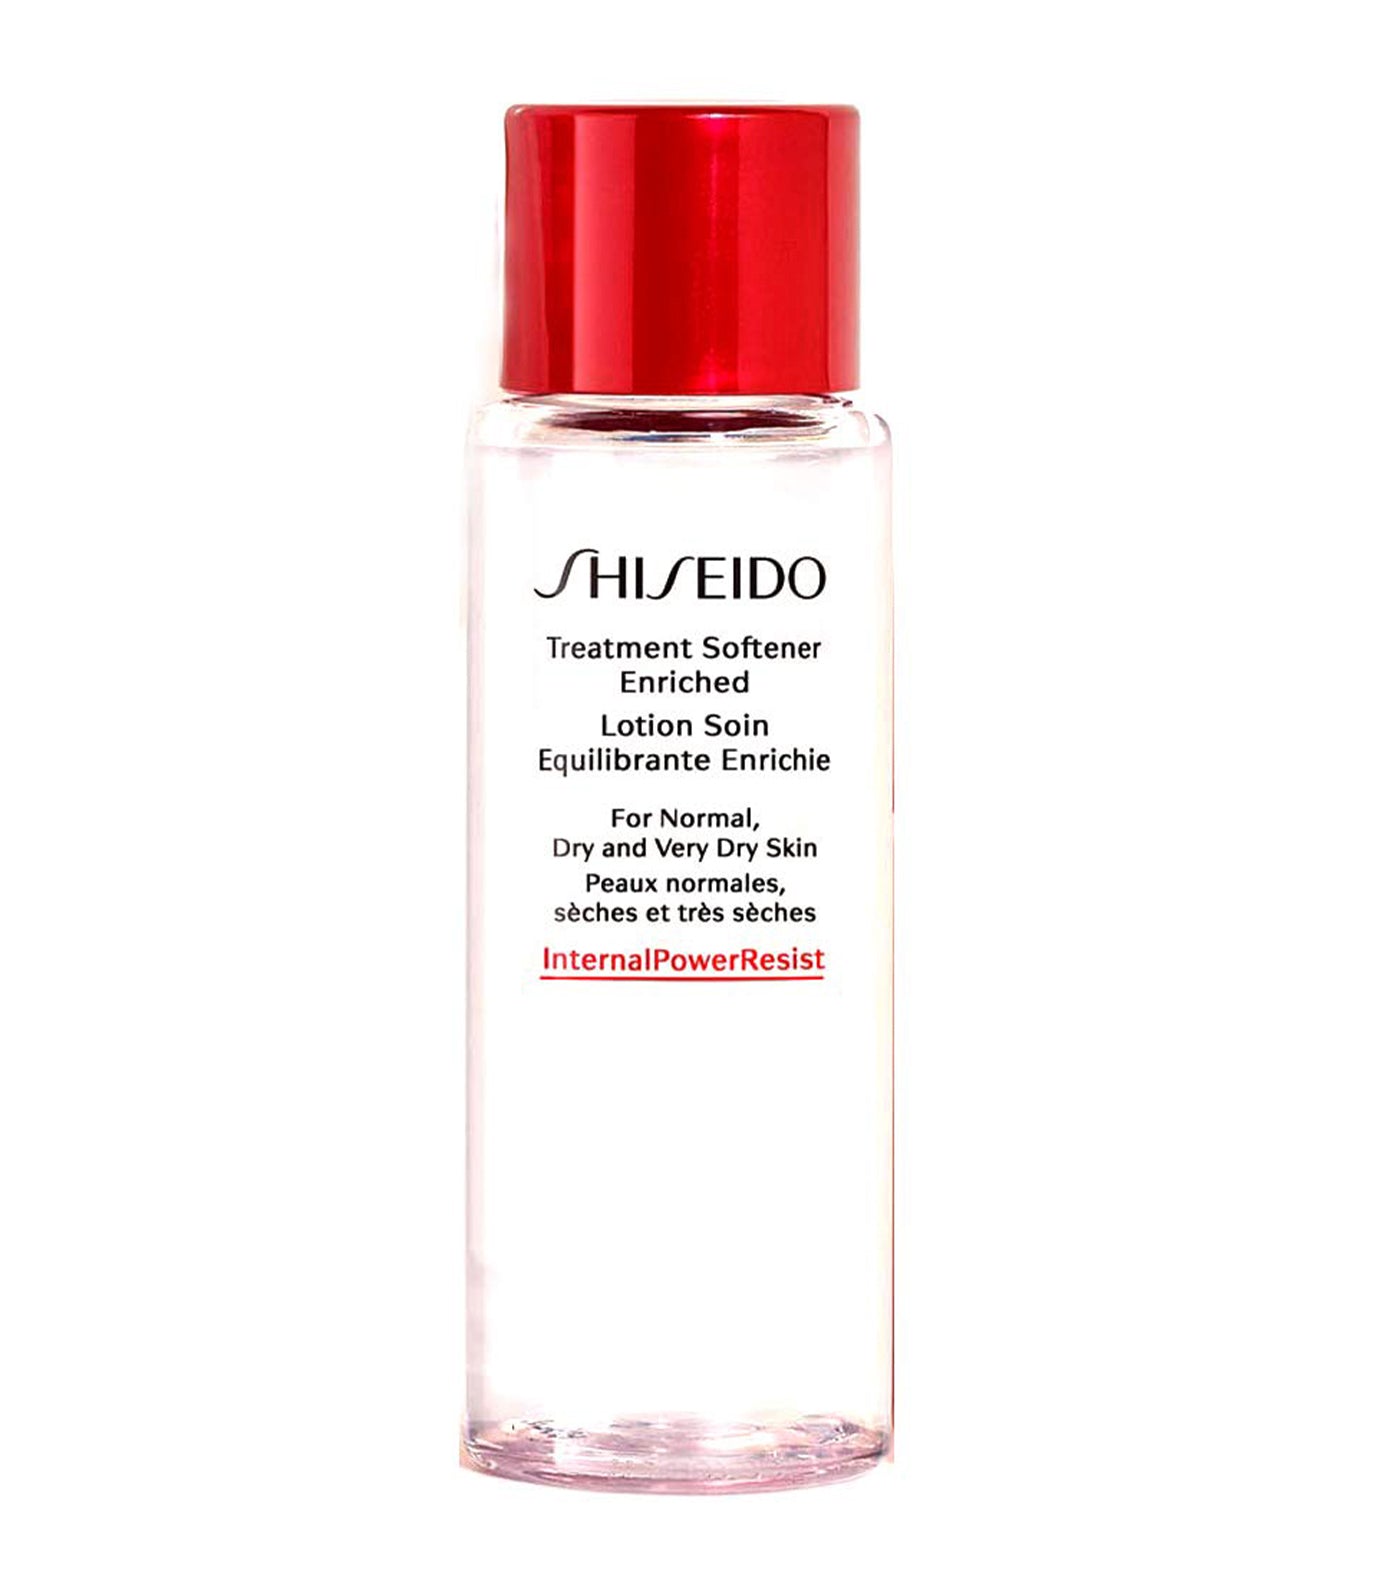 Shiseido Free Treatment Softener Enriched (For Normal, Dry and Very Dry Skin) 30ML